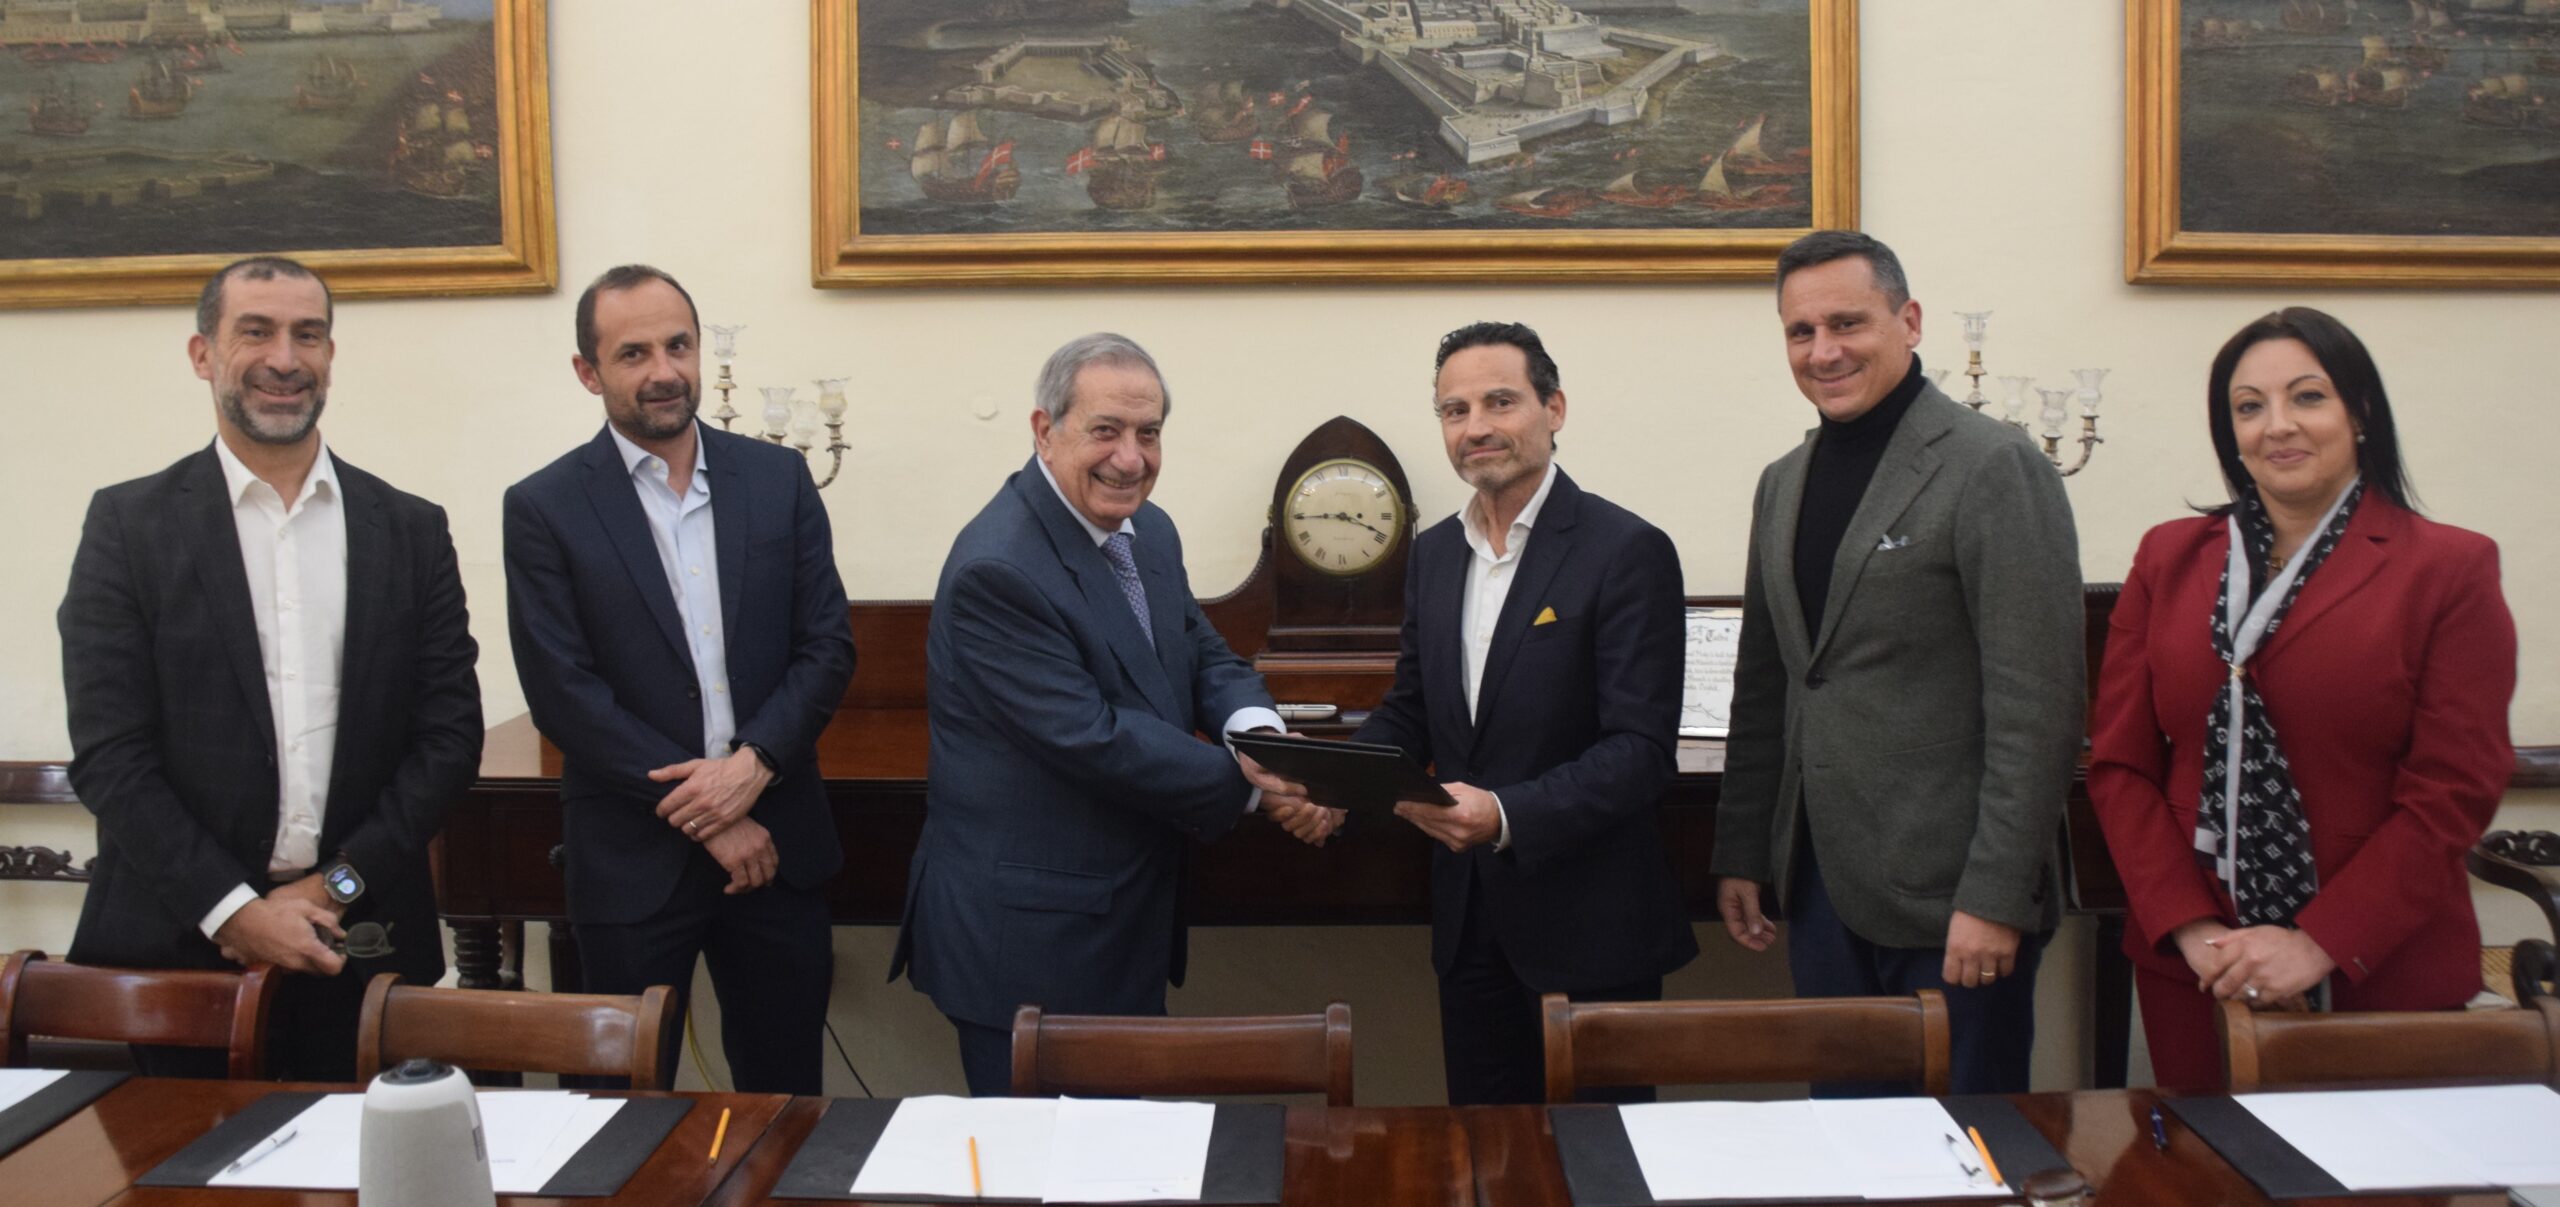 The Malta Chamber Forges Bronze Collaboration Agreement with Sullivan Shipping